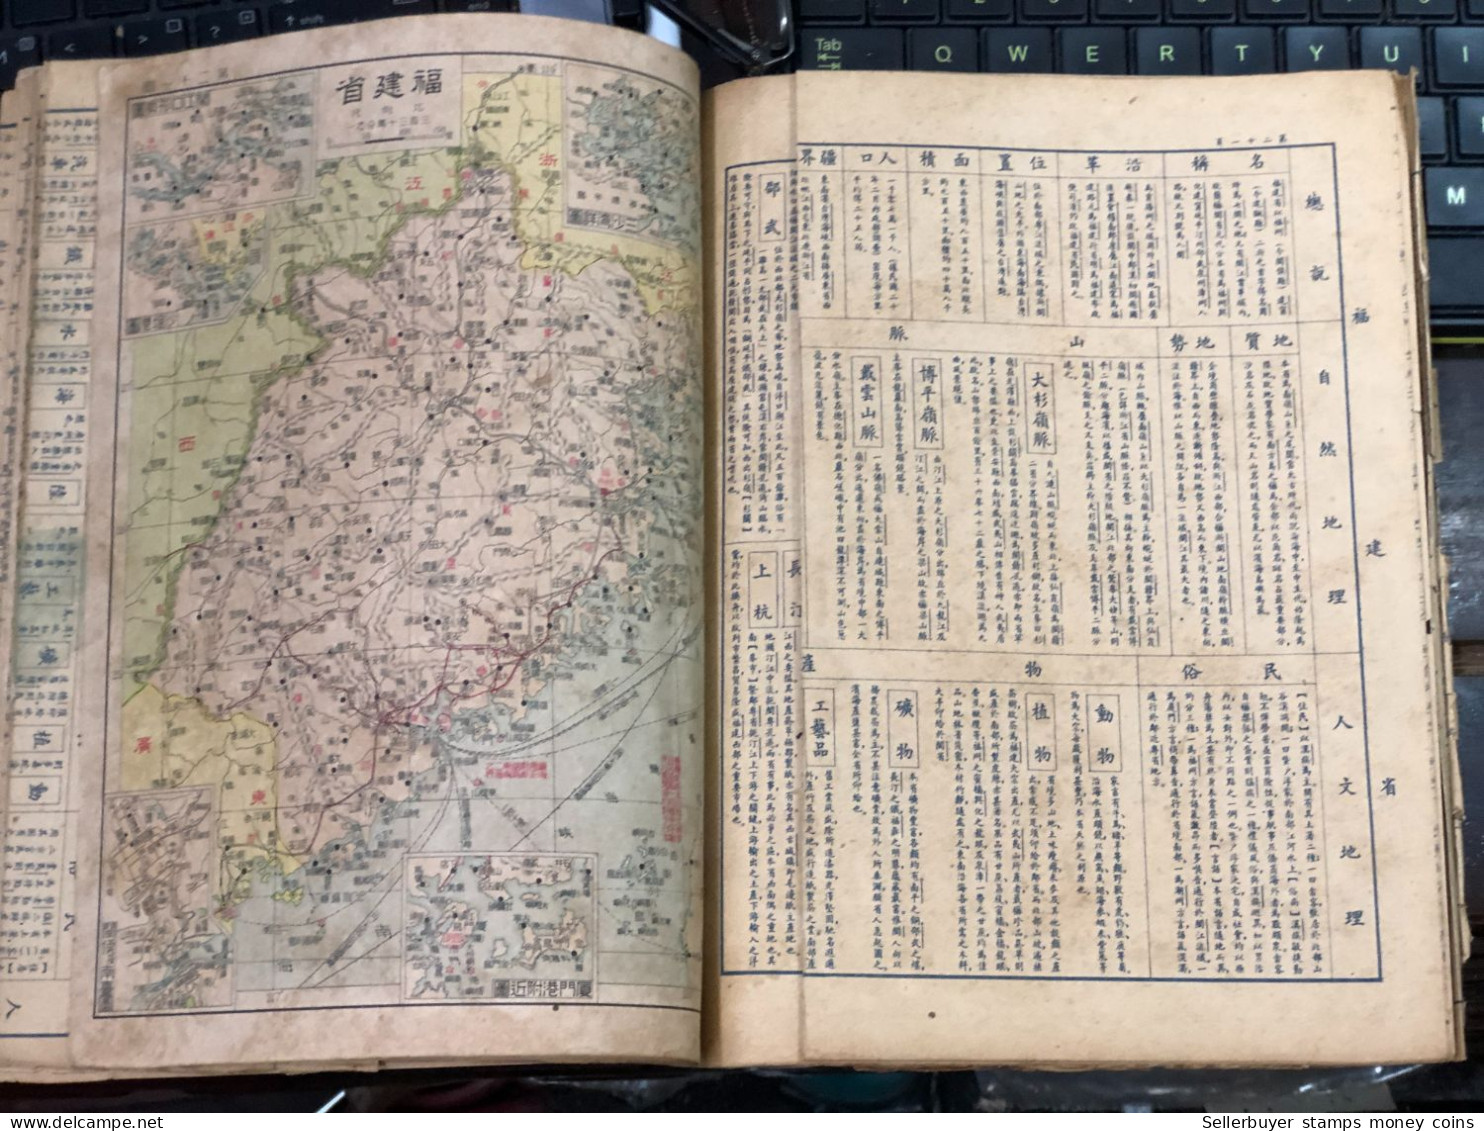 world maps old-book Map of the 38 provinces of ancient China before 1975-1 pcs 1book rare